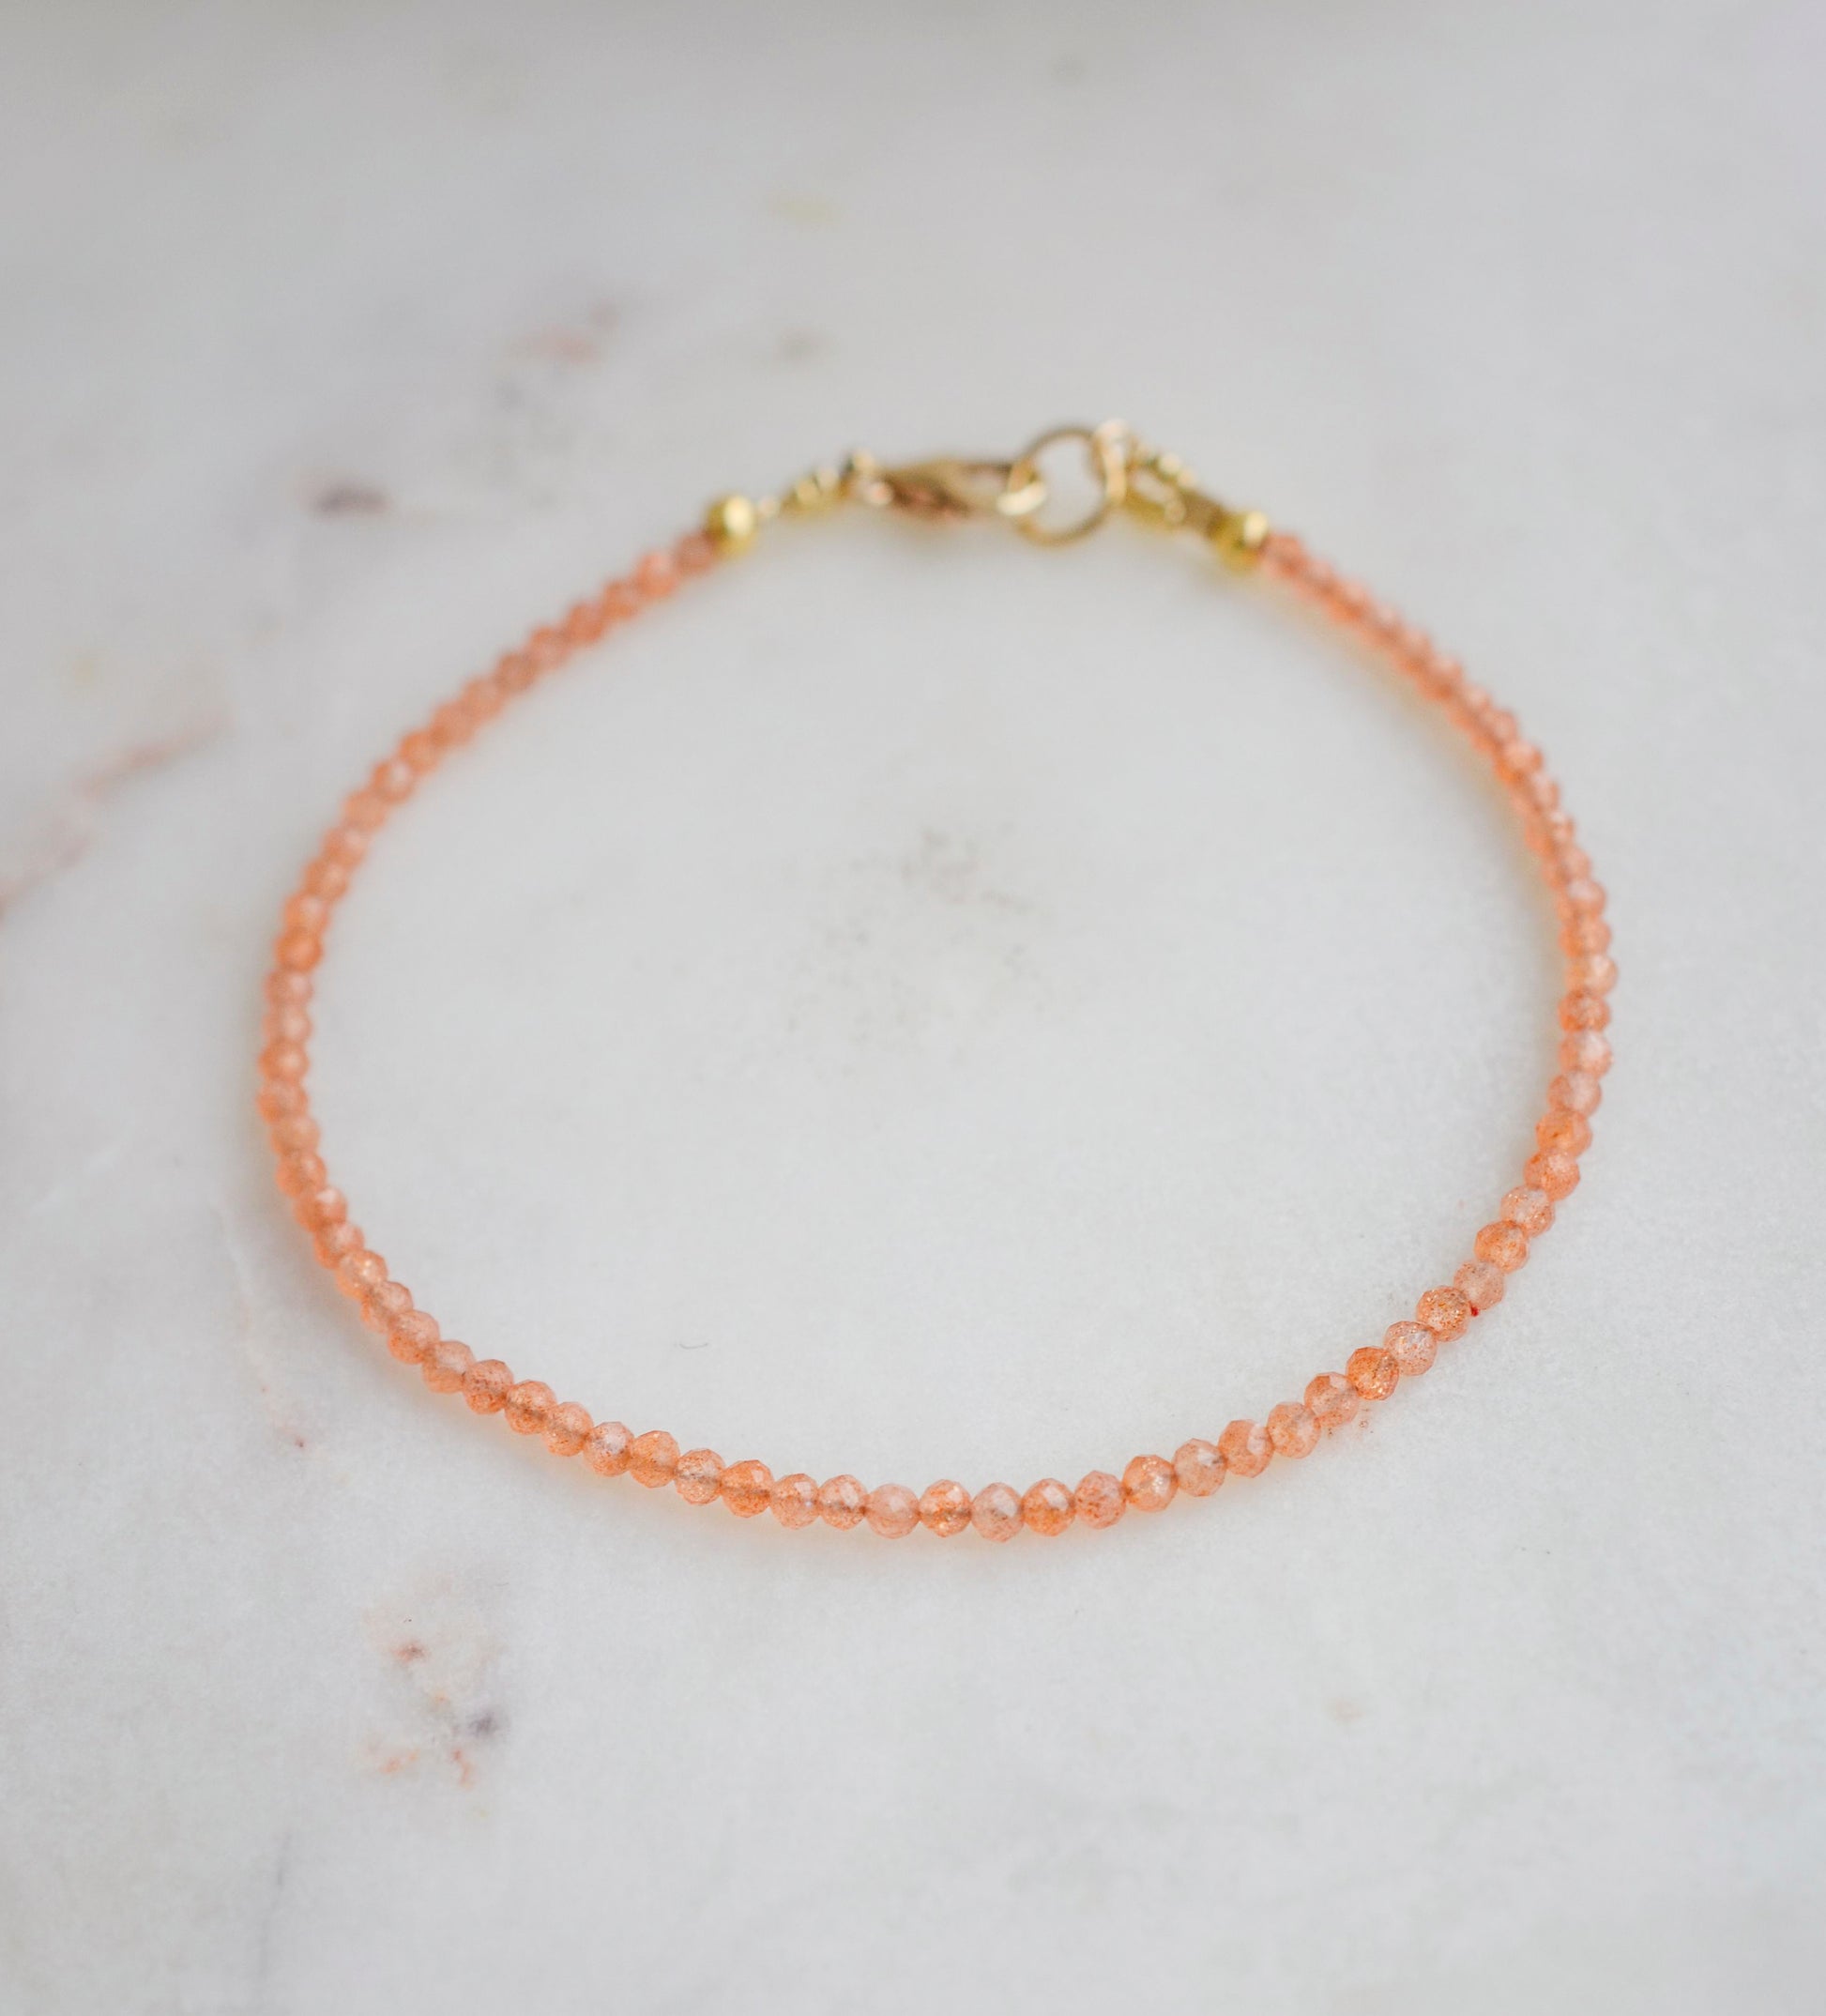 Genuine orange Sunstone beaded bracelet. The stones are round and faceted.